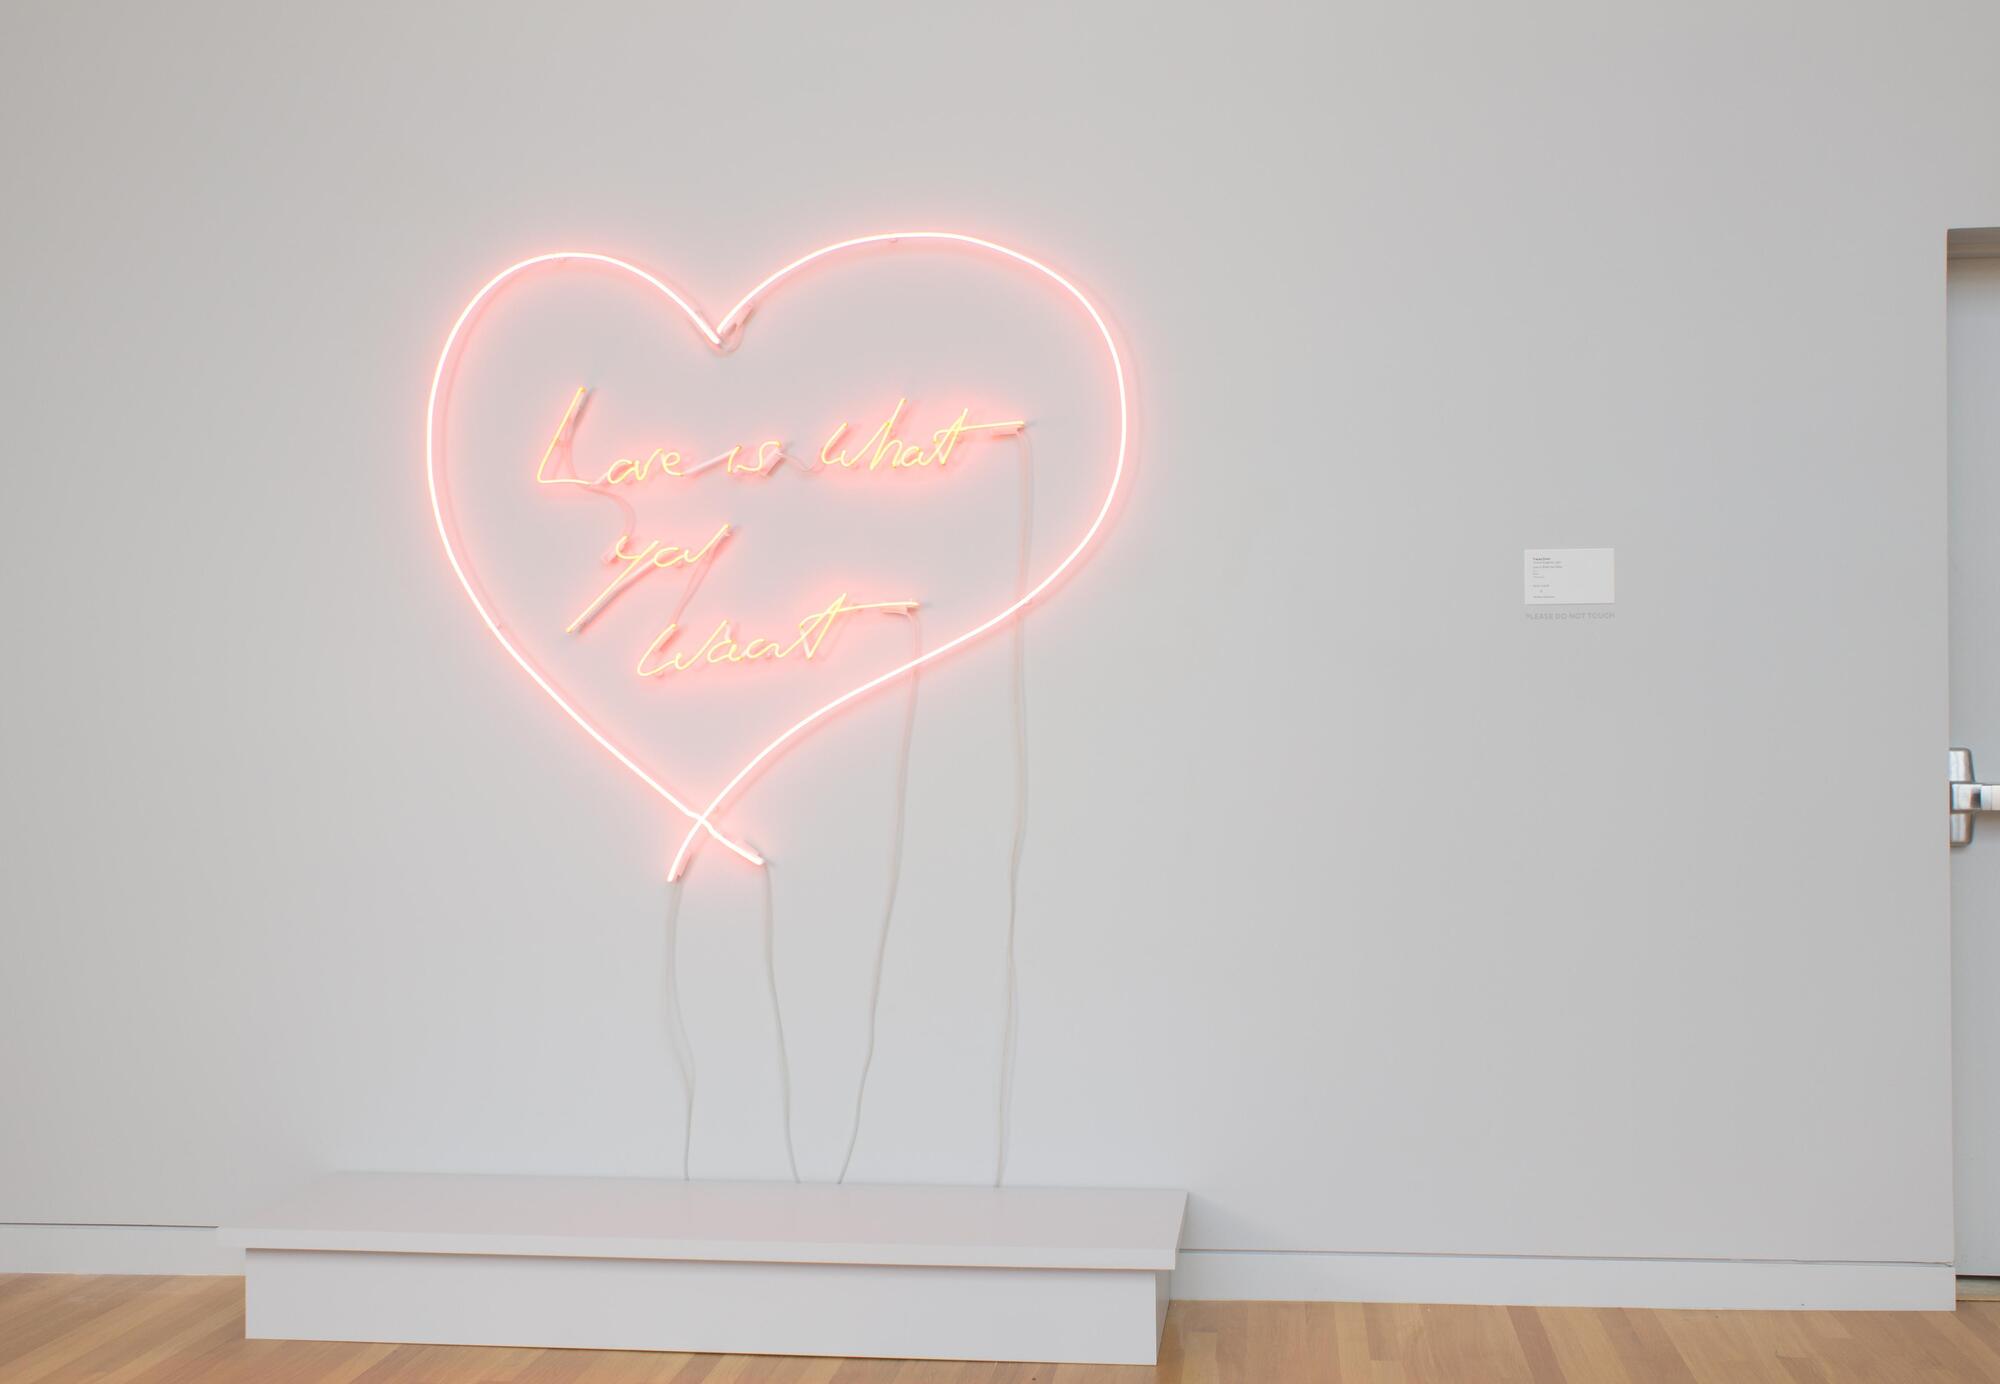 This sculpture is a pink neon light in the shape of a heart with the words &quot;Love is What You Want&quot; inscribed within the heart.